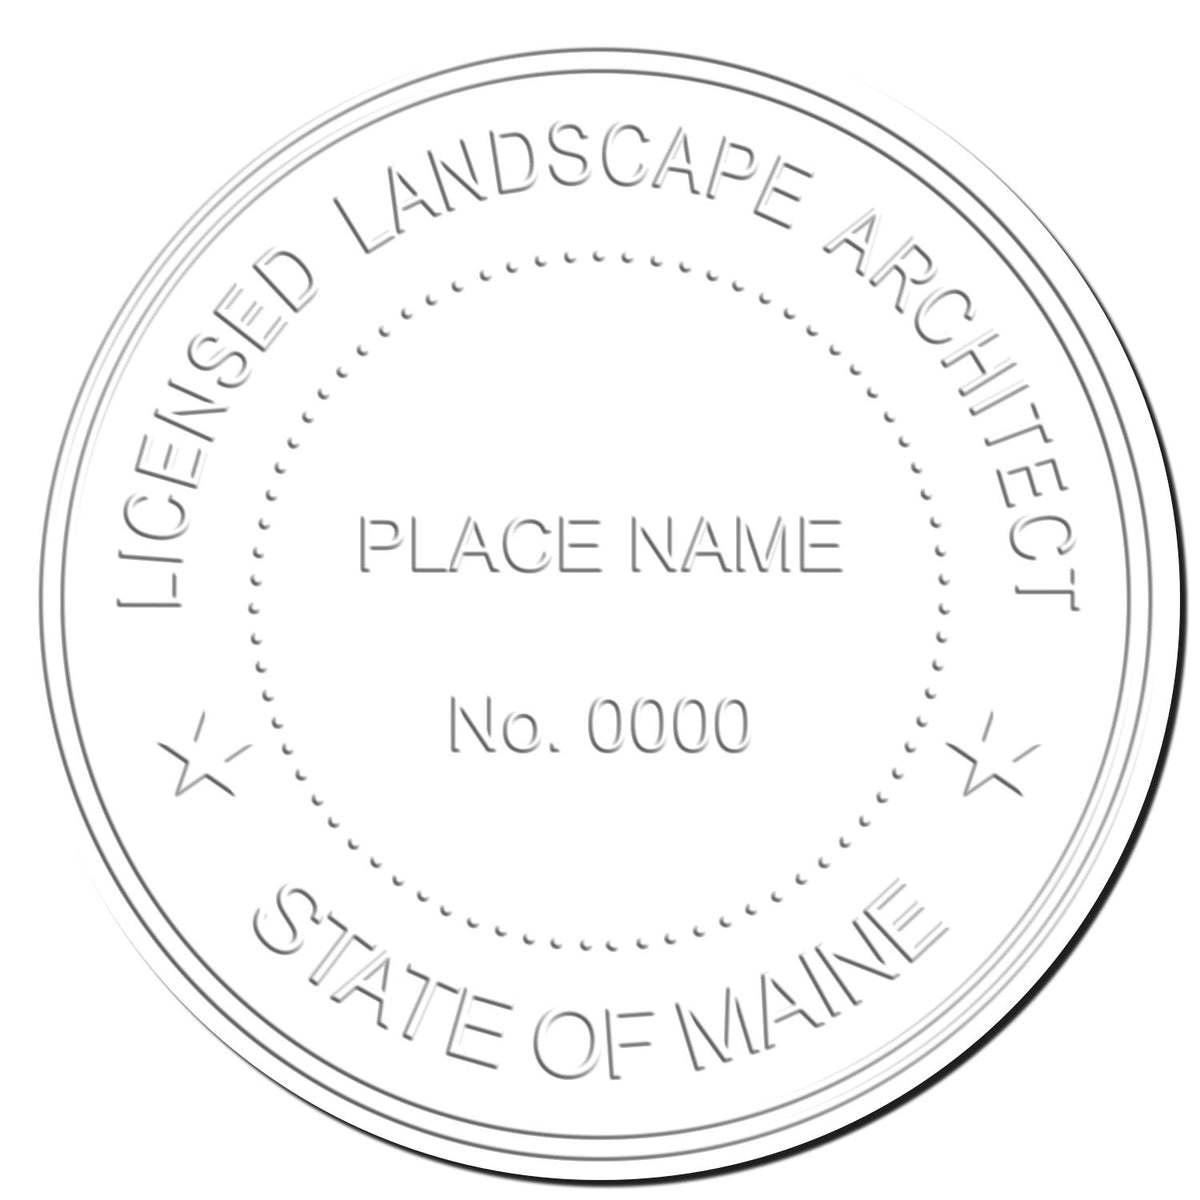 This paper is stamped with a sample imprint of the Soft Pocket Maine Landscape Architect Embosser, signifying its quality and reliability.